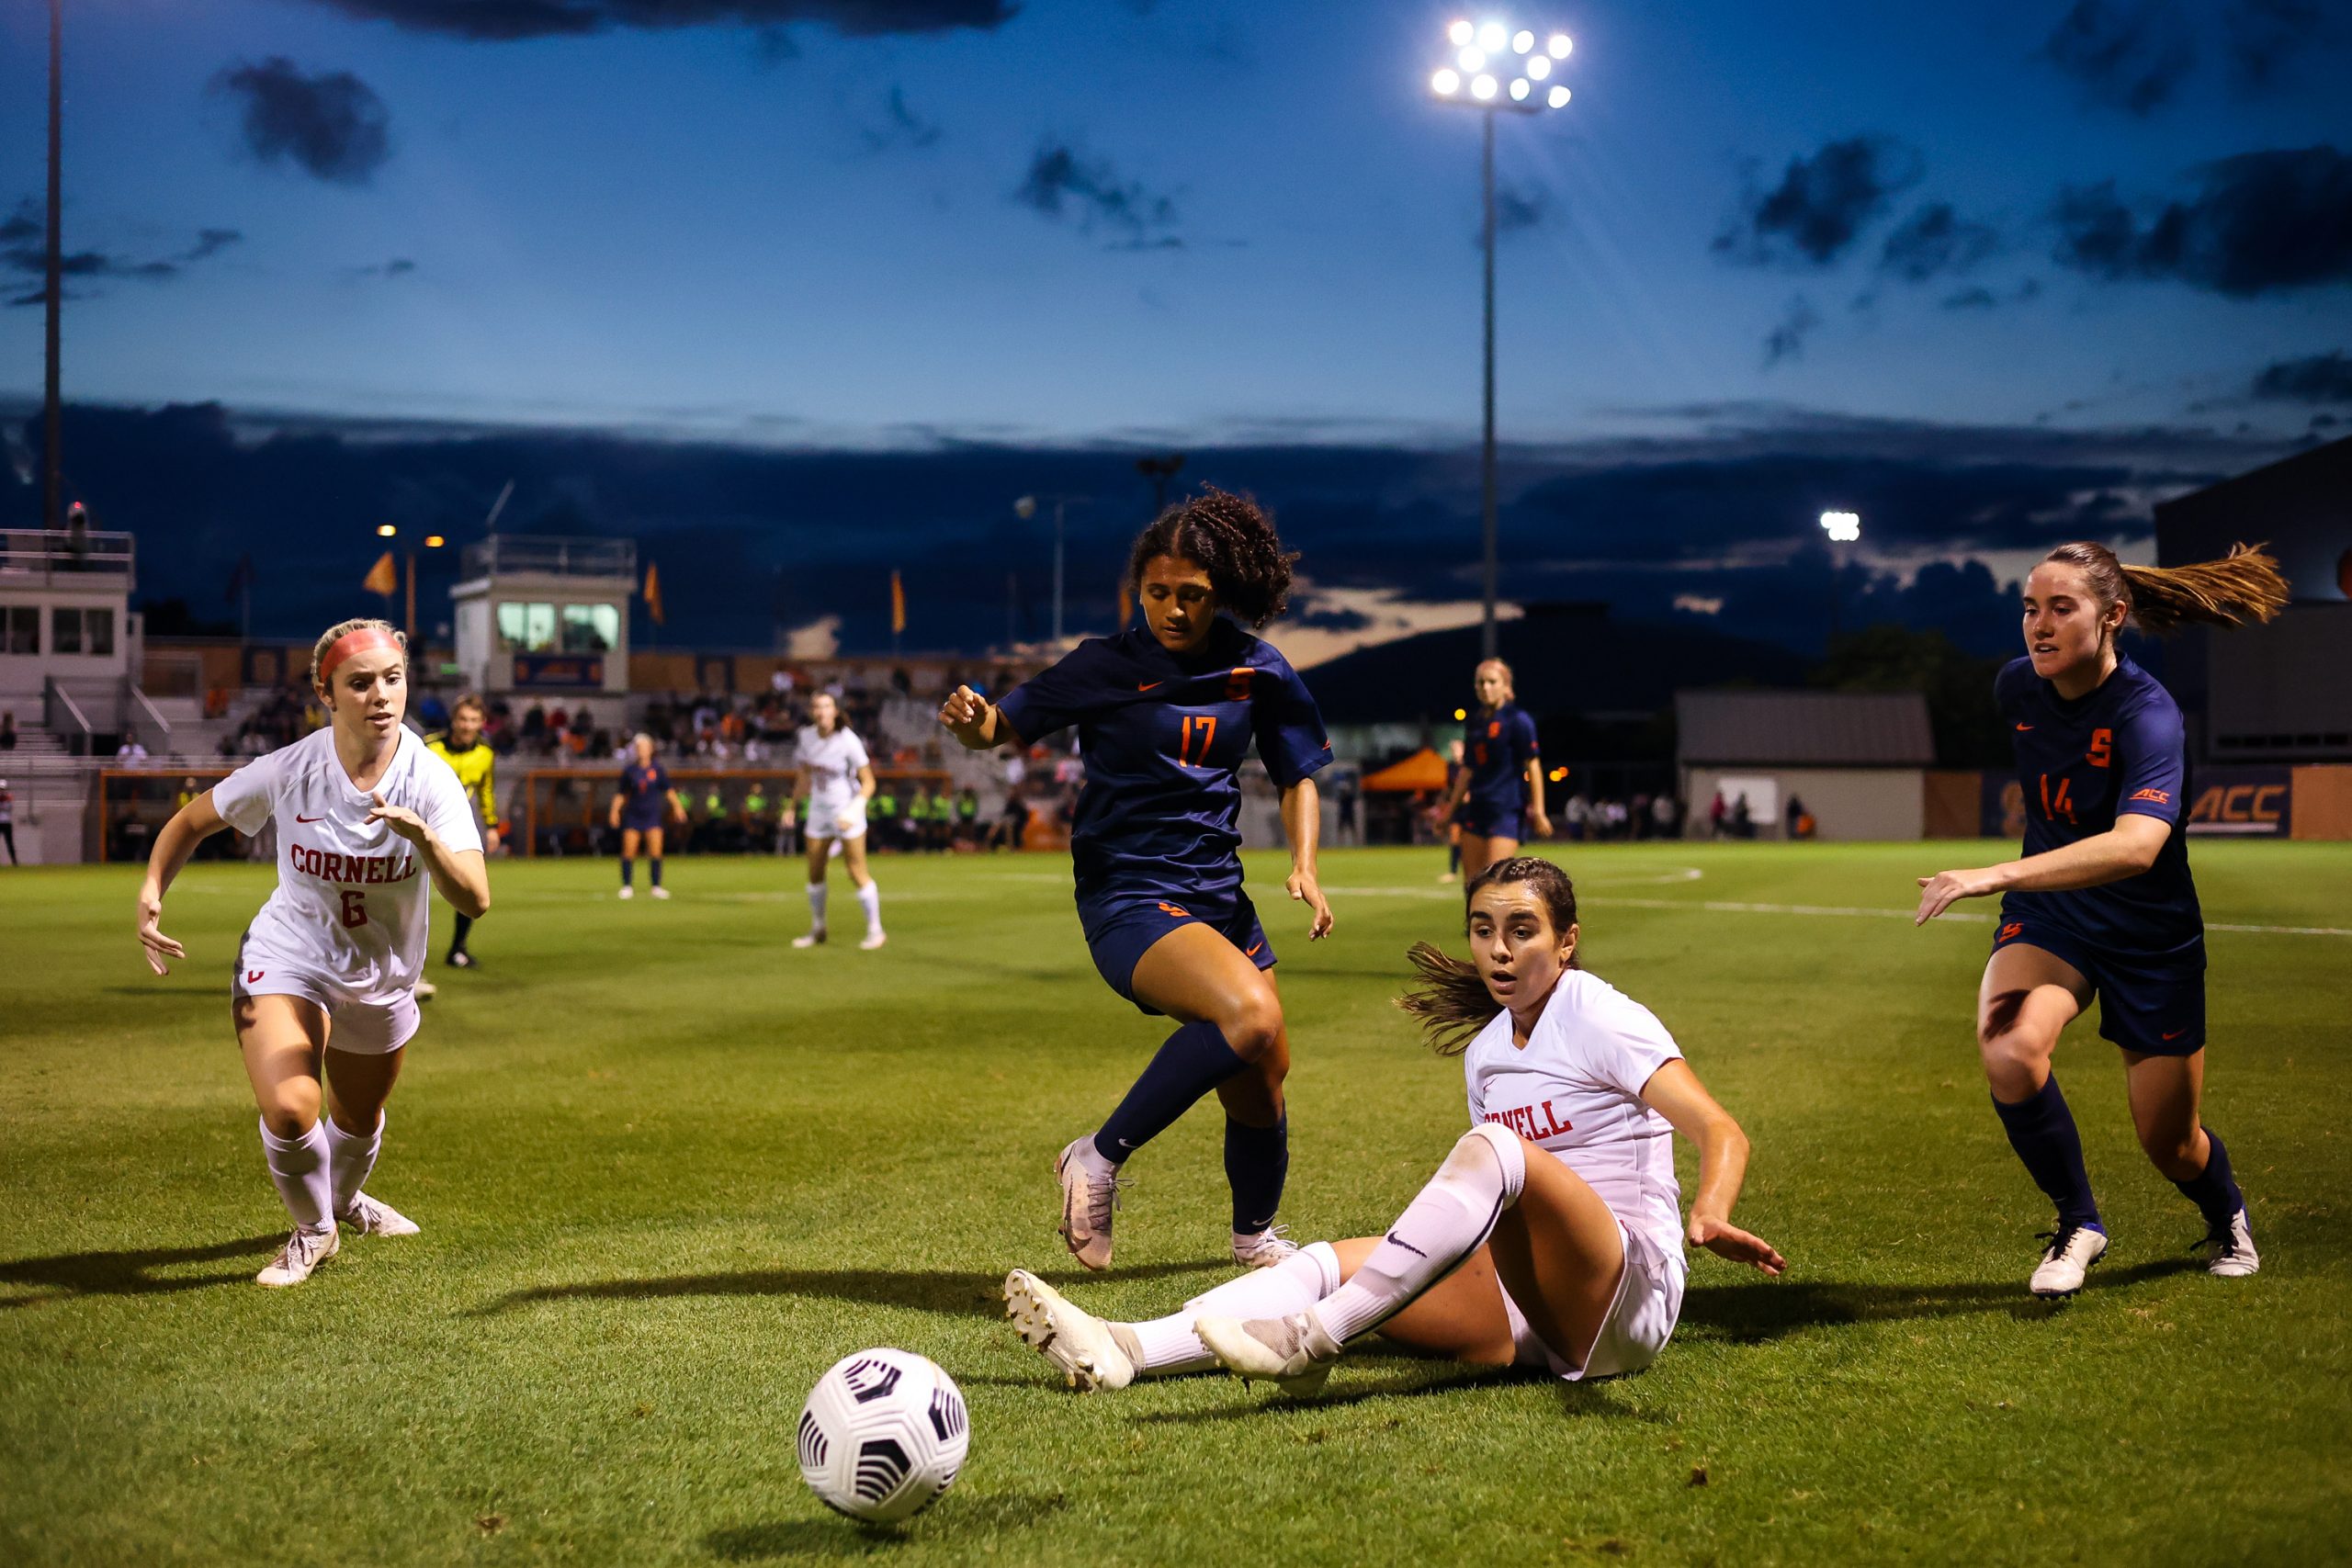 [Left to Right] Cornell's Ashley Durik, Syracuse's Kylen Grant, Cornell's Evanthia Spyredes and Syracuse's Kate Murphy chase the ball after it was blocked by Spyredes during a Women's Soccer game at SU Soccer Stadium on September 9, 2021.